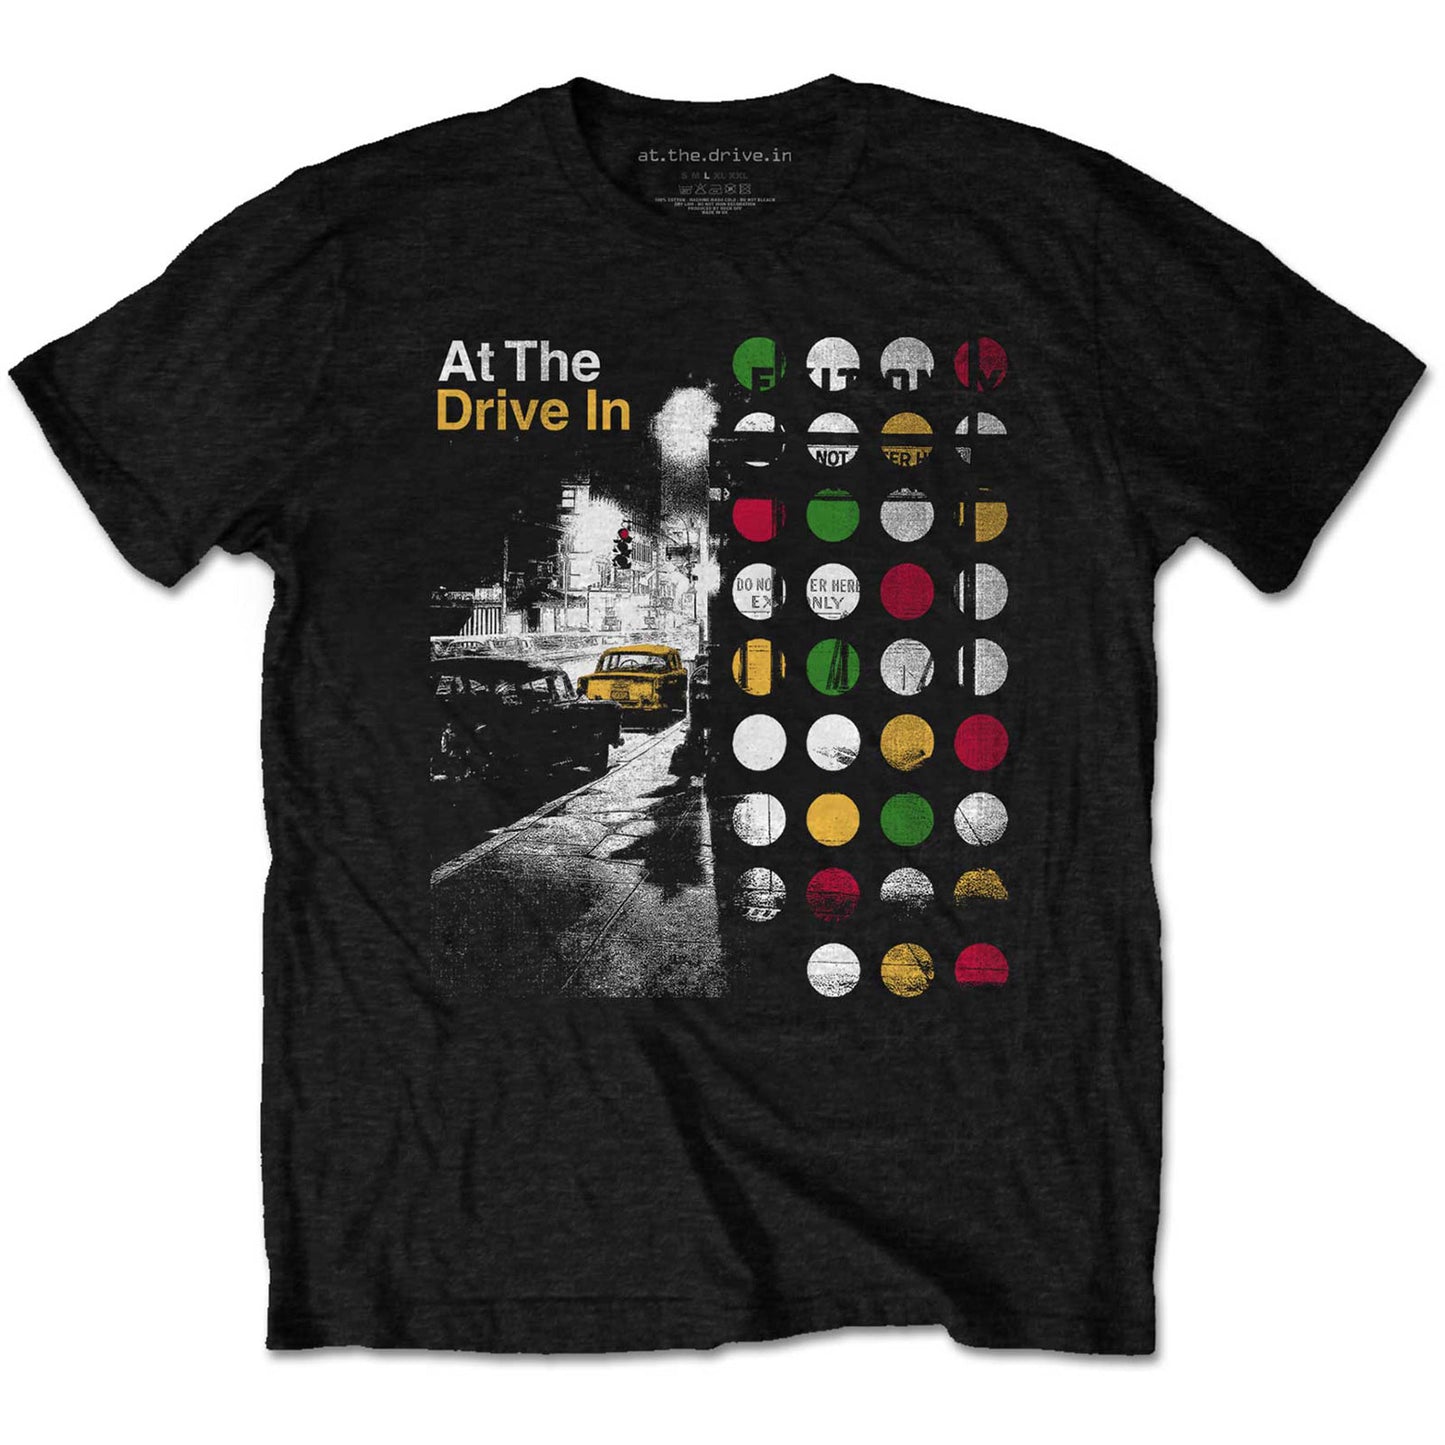 At The Drive-In T-Shirt: Street